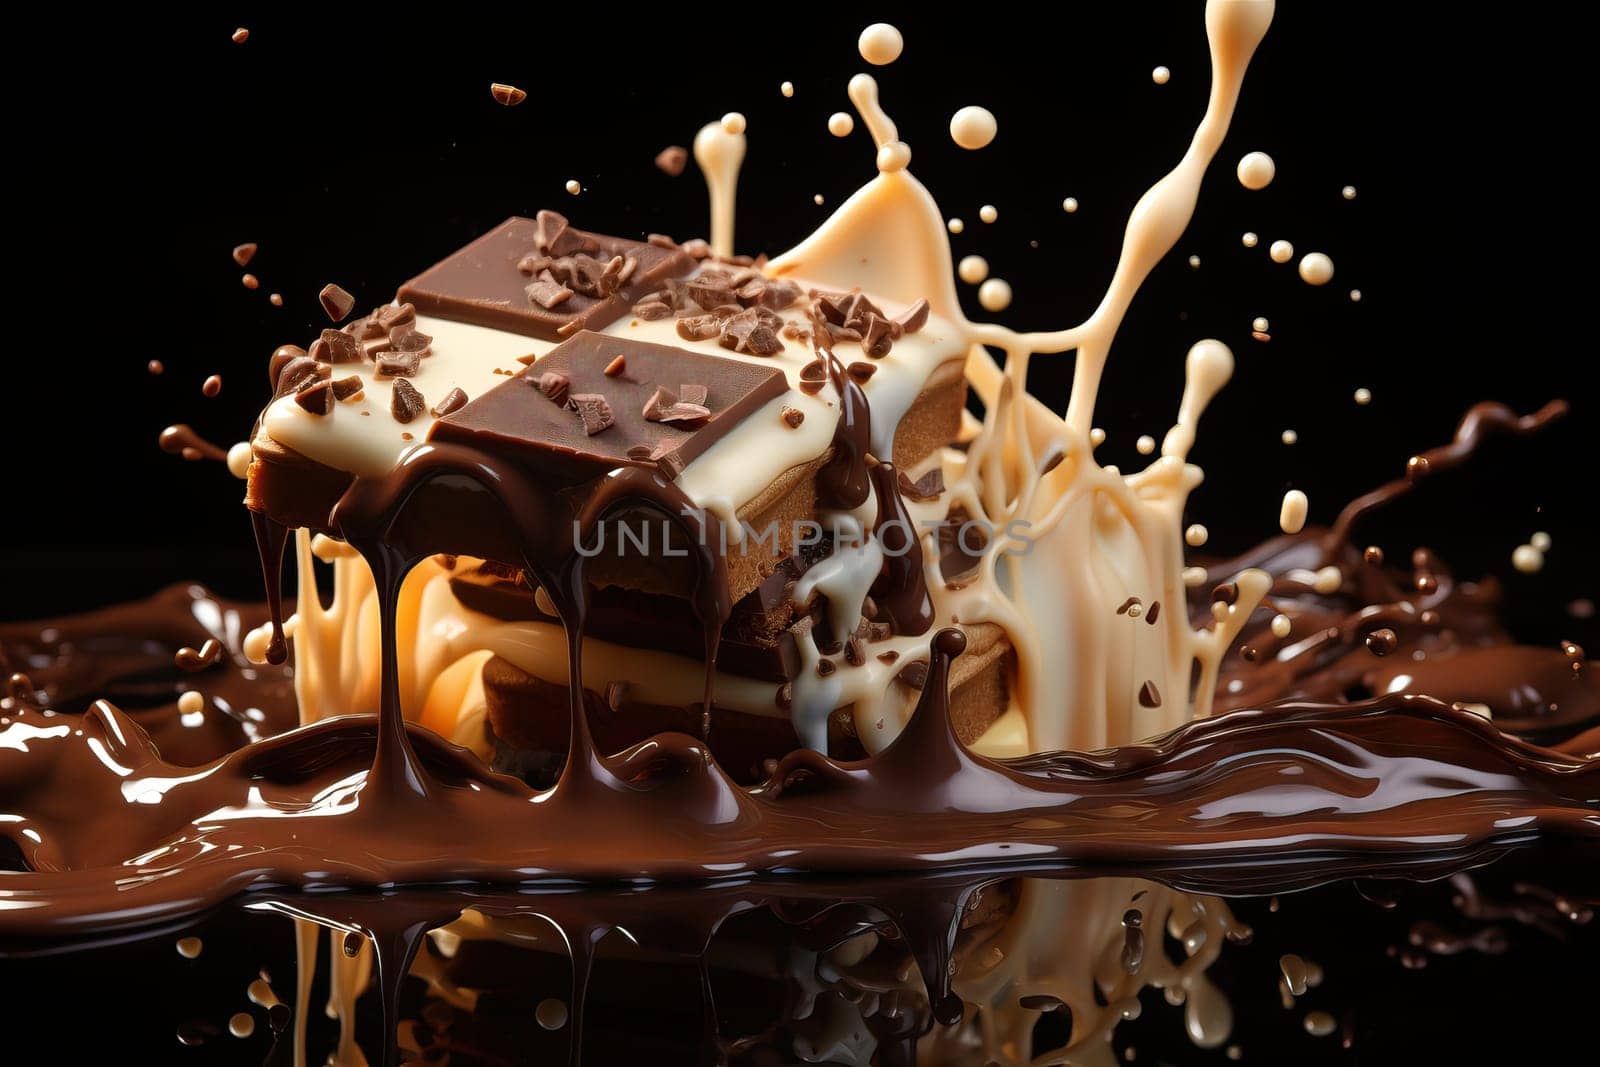 pieces of chocolate falling on chocolate sauce and a splash of milk cream on a black background.